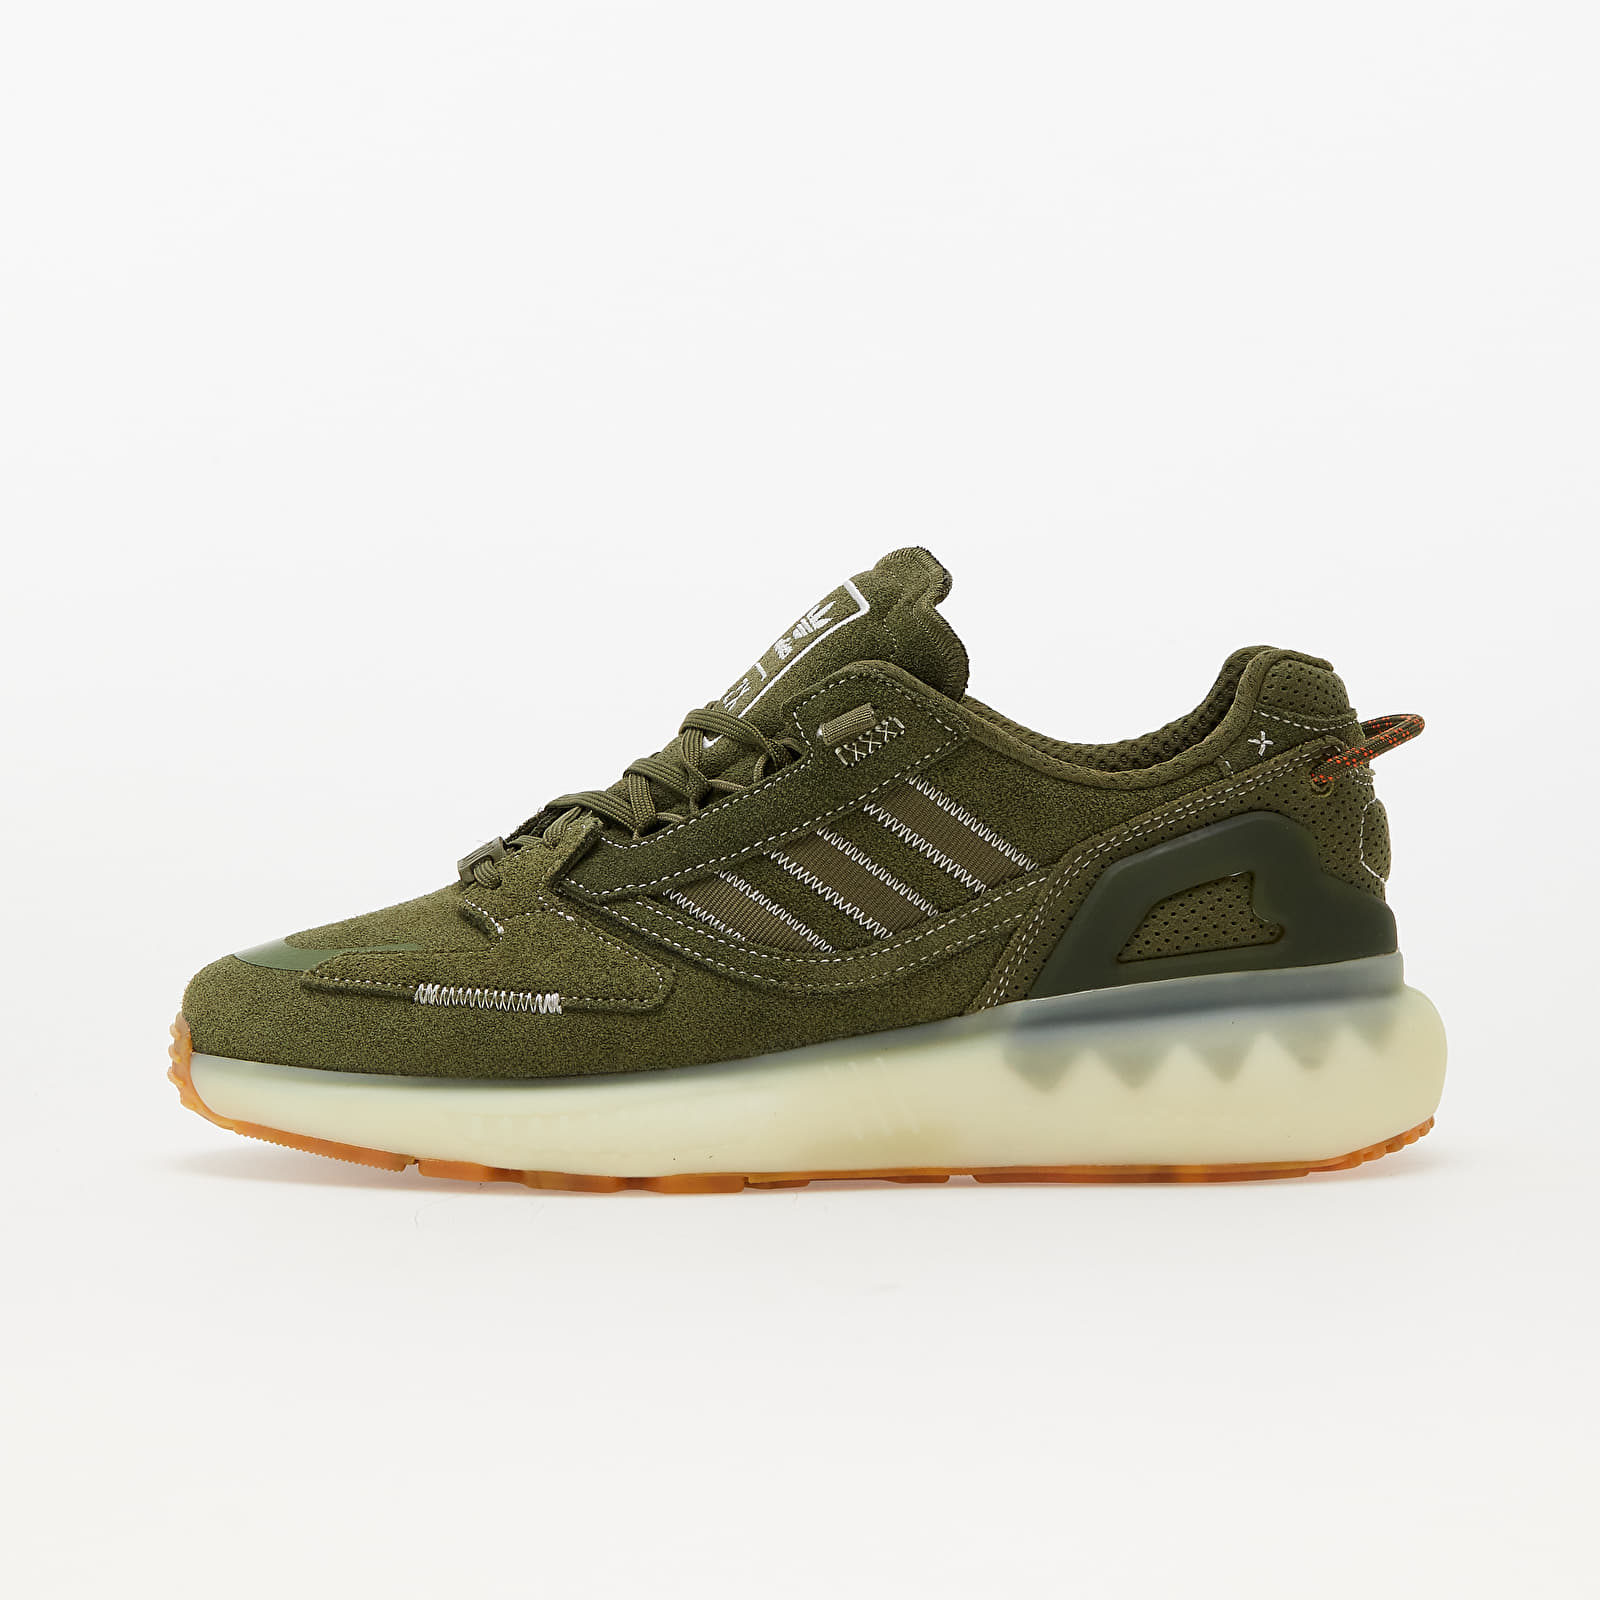 Men's shoes adidas ZX 5K BOOST Focus Olive/ Off White/ Ecru Tint